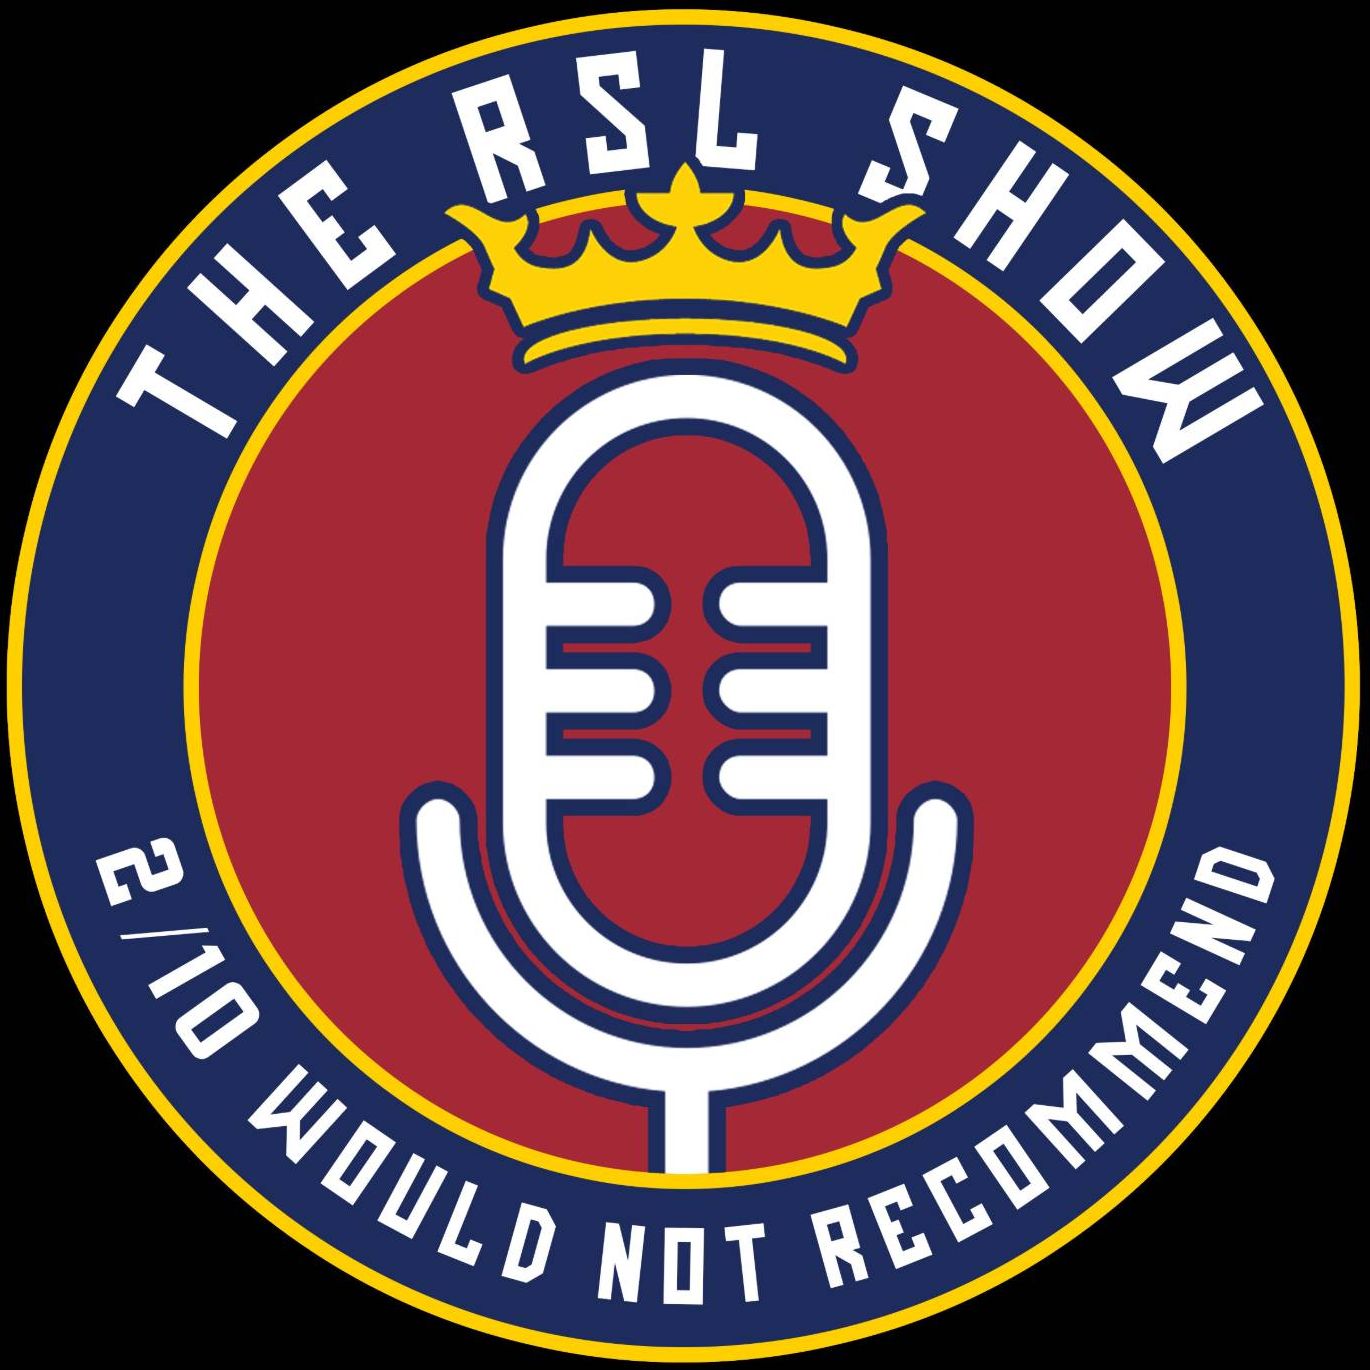 The Spooky RSL Show